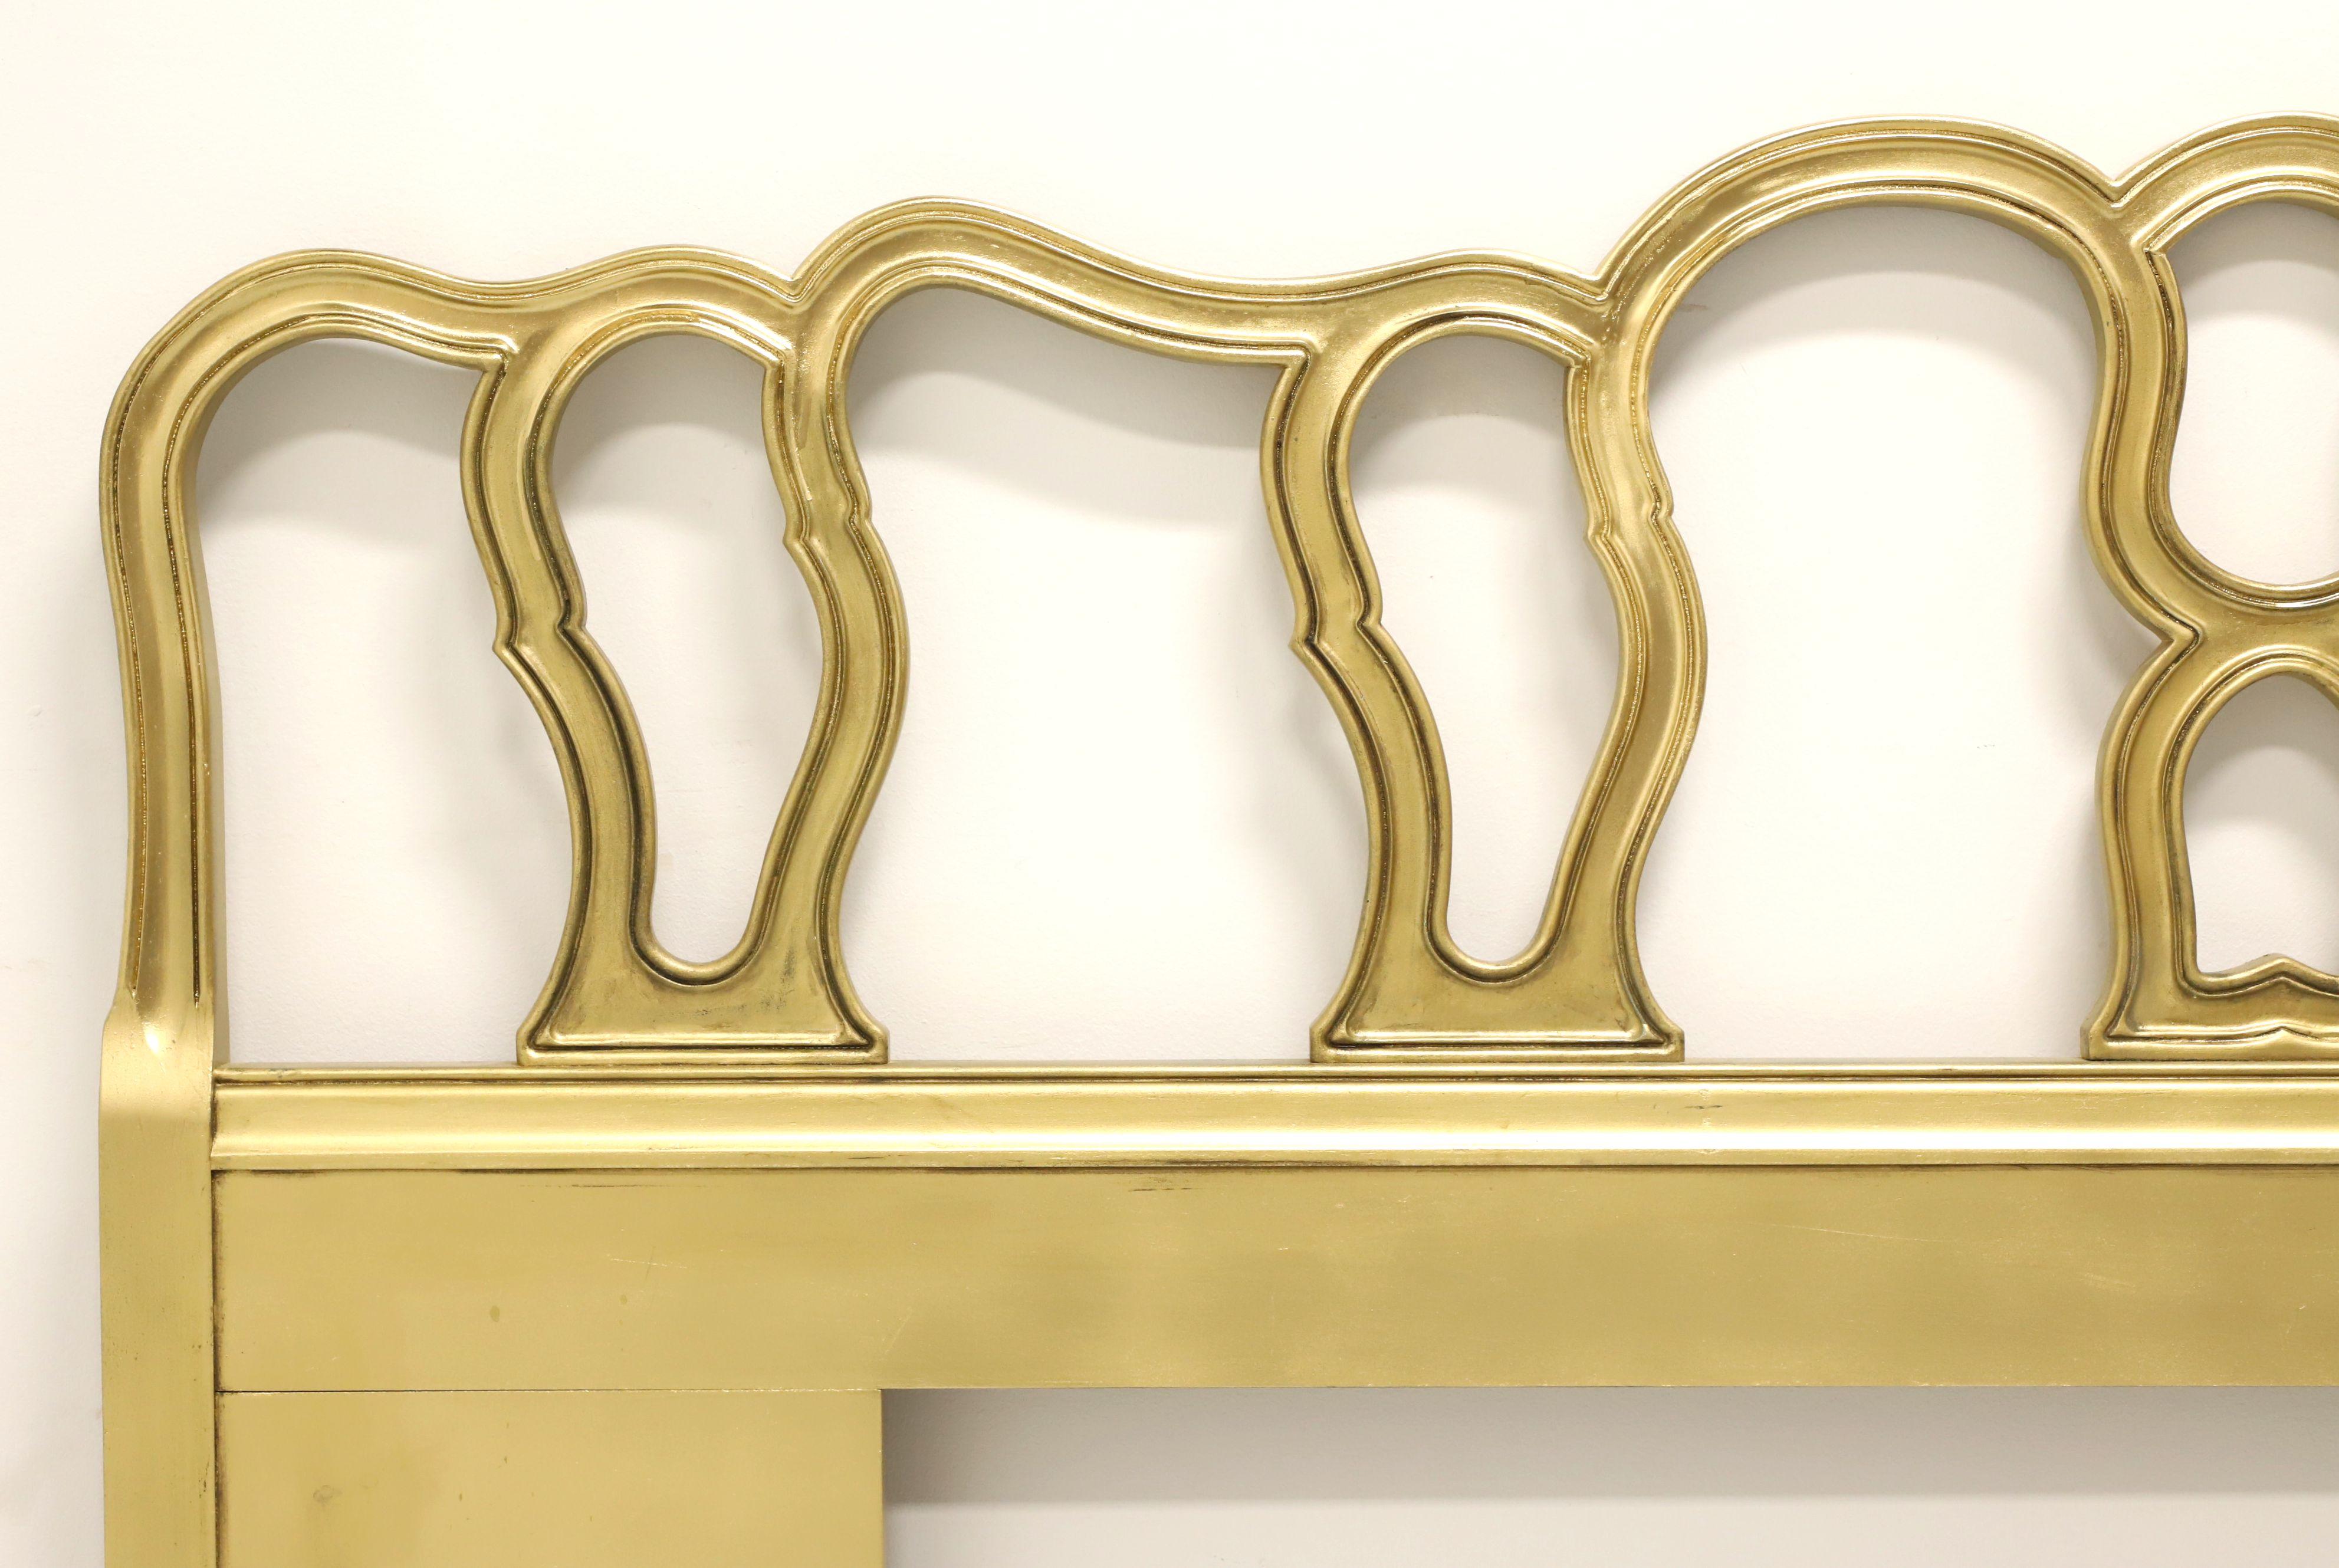 A French Provincial style king size headboard by Drexel Heritage, from their Bordeaux line. Solid wood painted a lighter shade of gold, decoratively carved pierced design with a serpentine shape. Made in North Carolina, USA, circa 1967.

Style #: